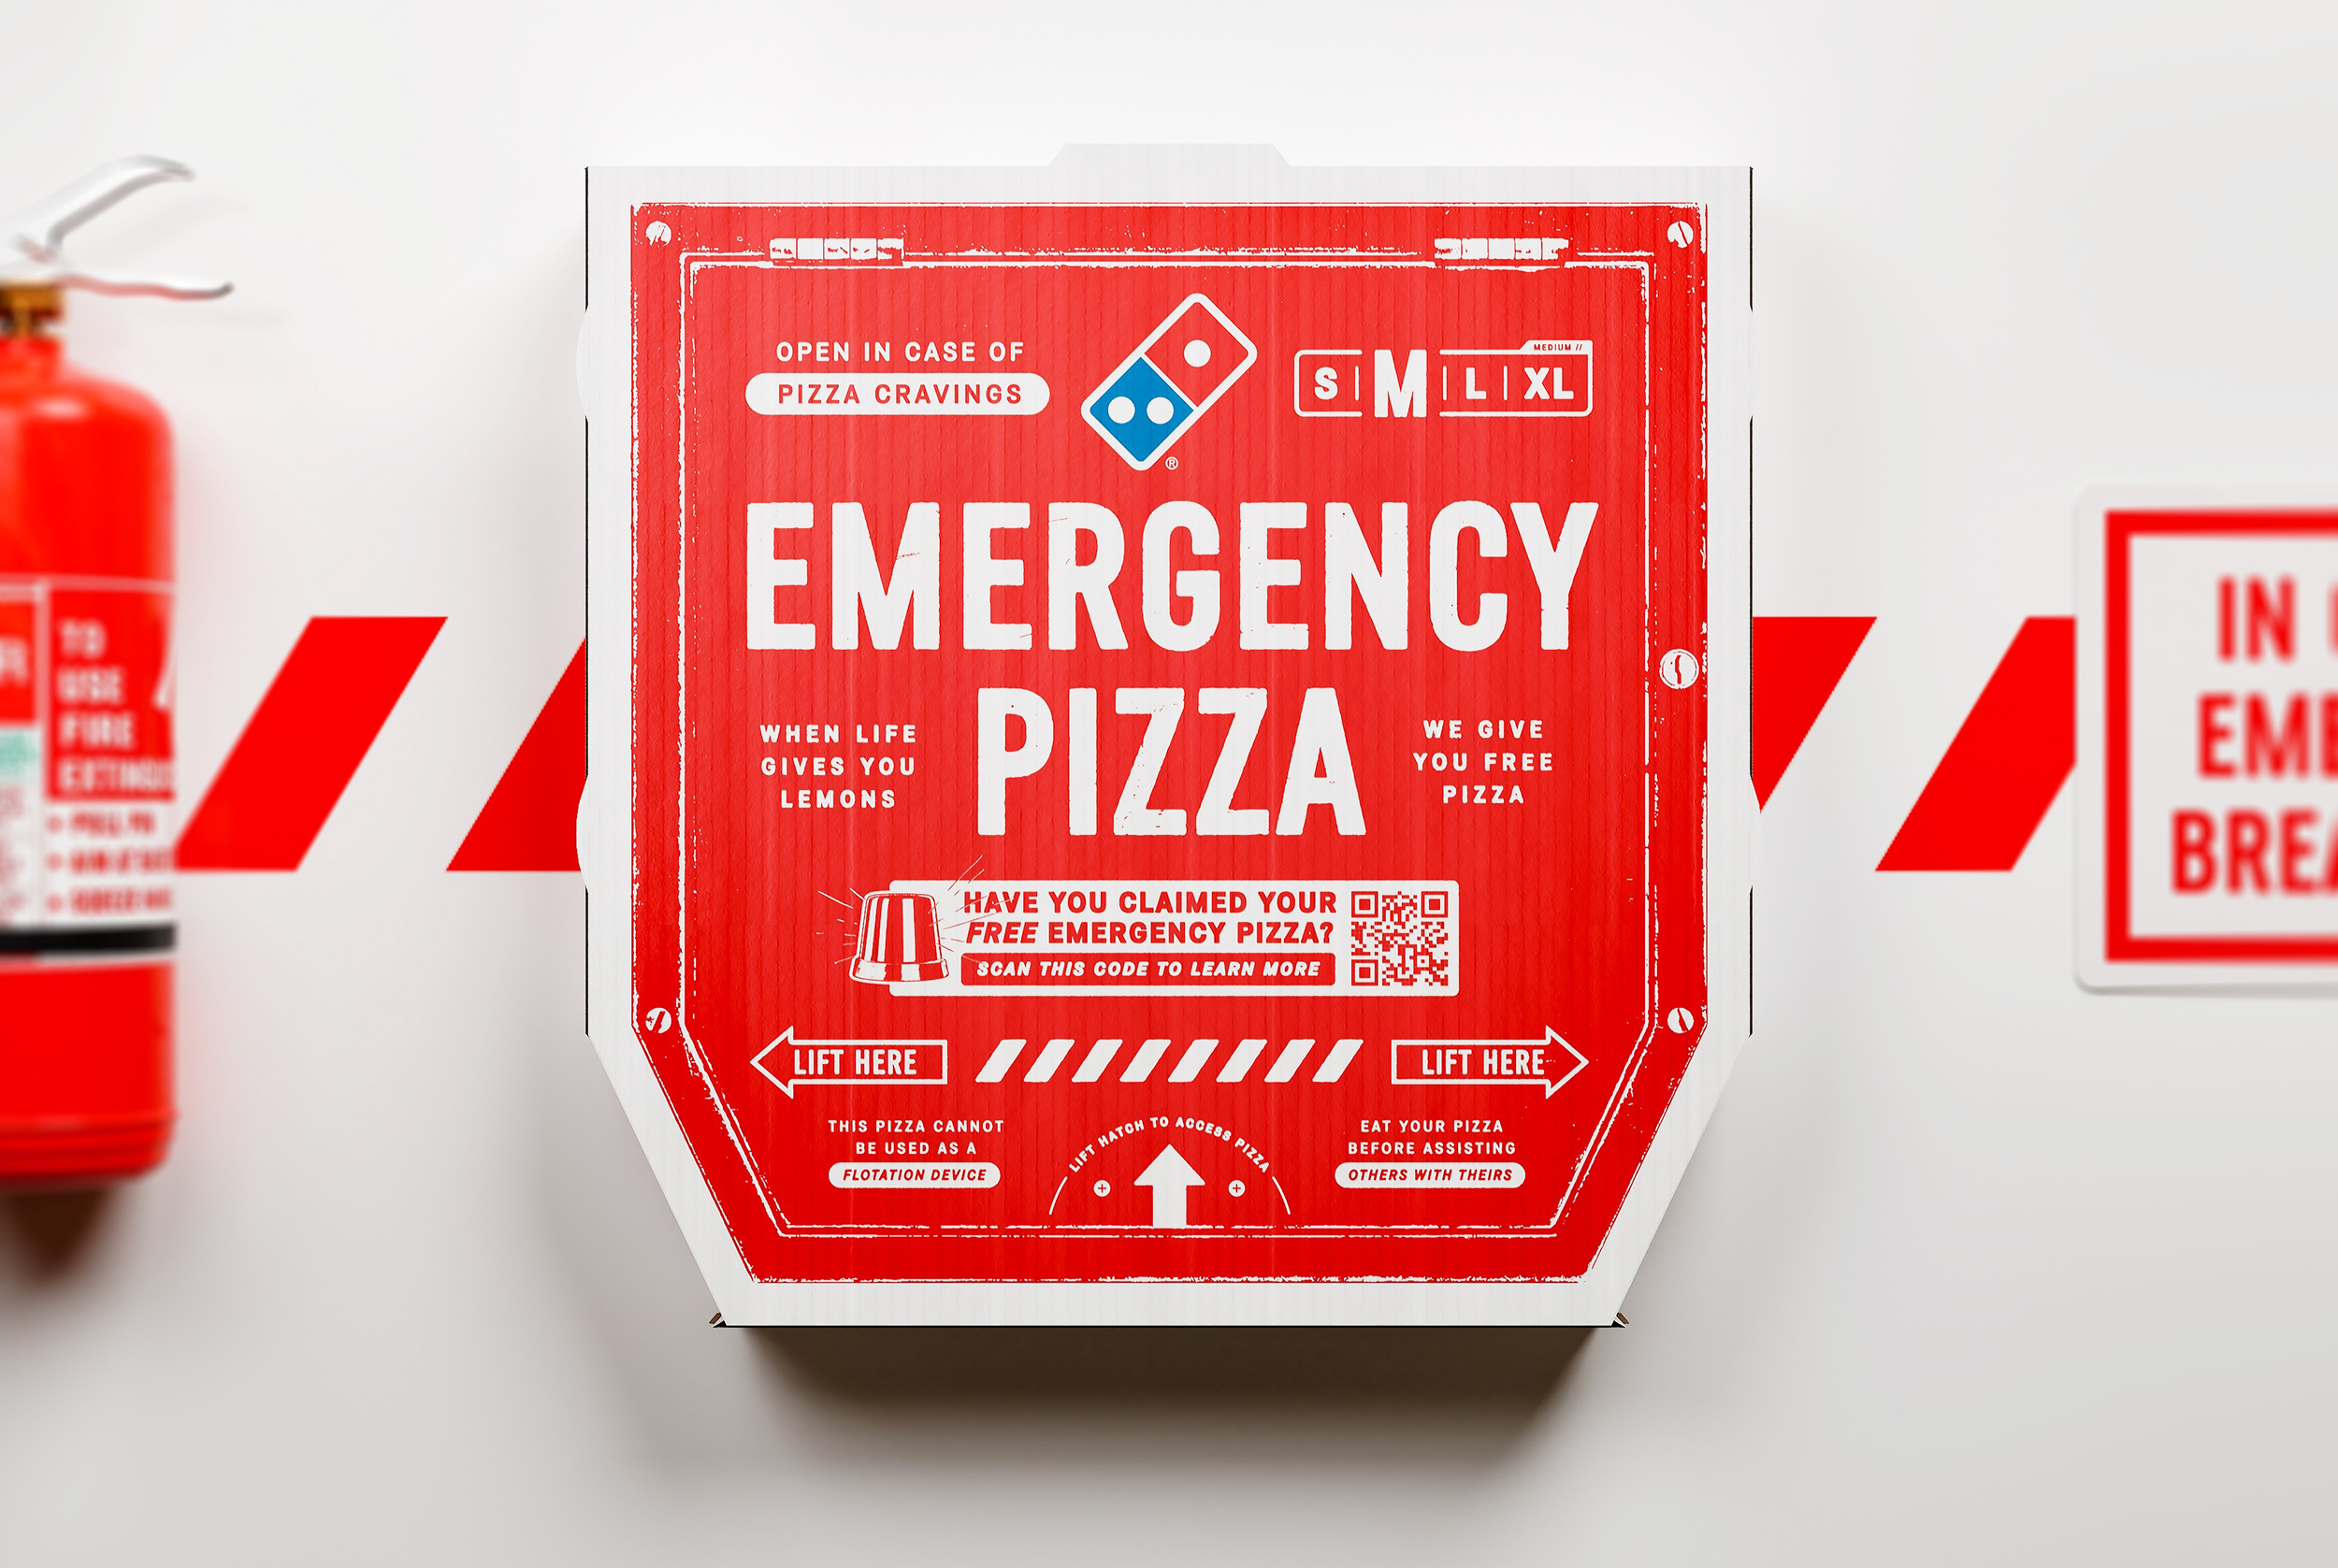 Domino’s ‘Emergency Pizza’ Launched for Those Unexpected Moments!